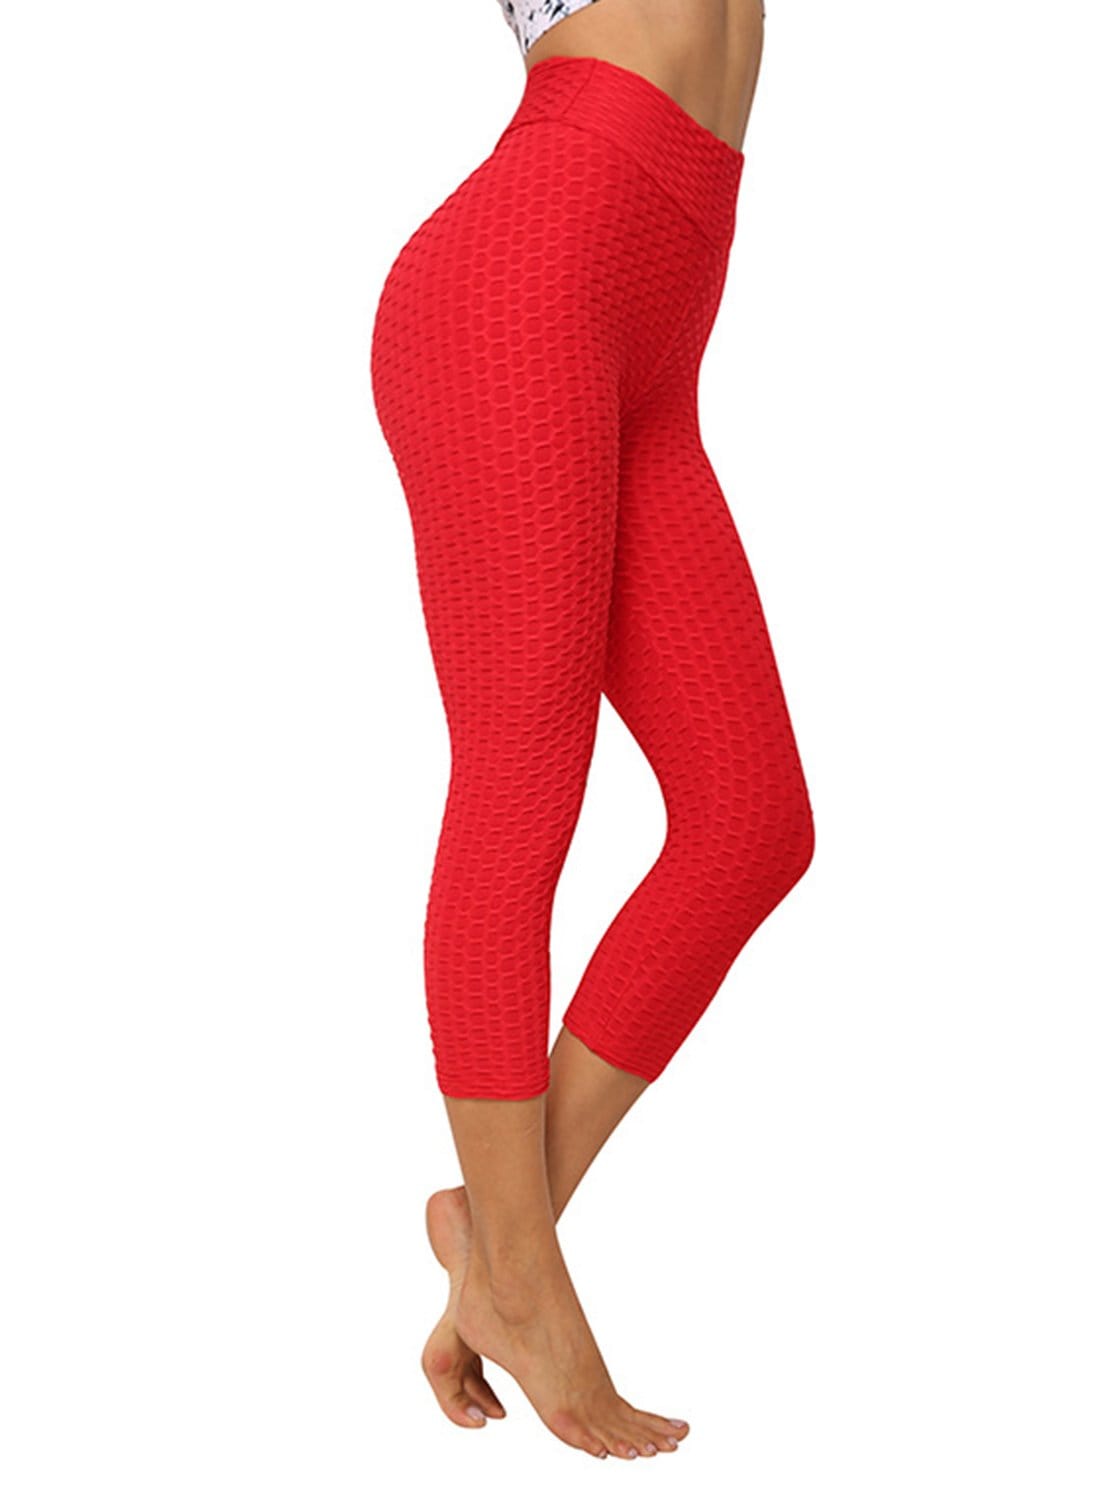 PULLIMORE Womens High Waist Leggings Textured Butt Lifting Shaping Capri  Workout Yoga Fitness Slimming Pants (S, Red) 